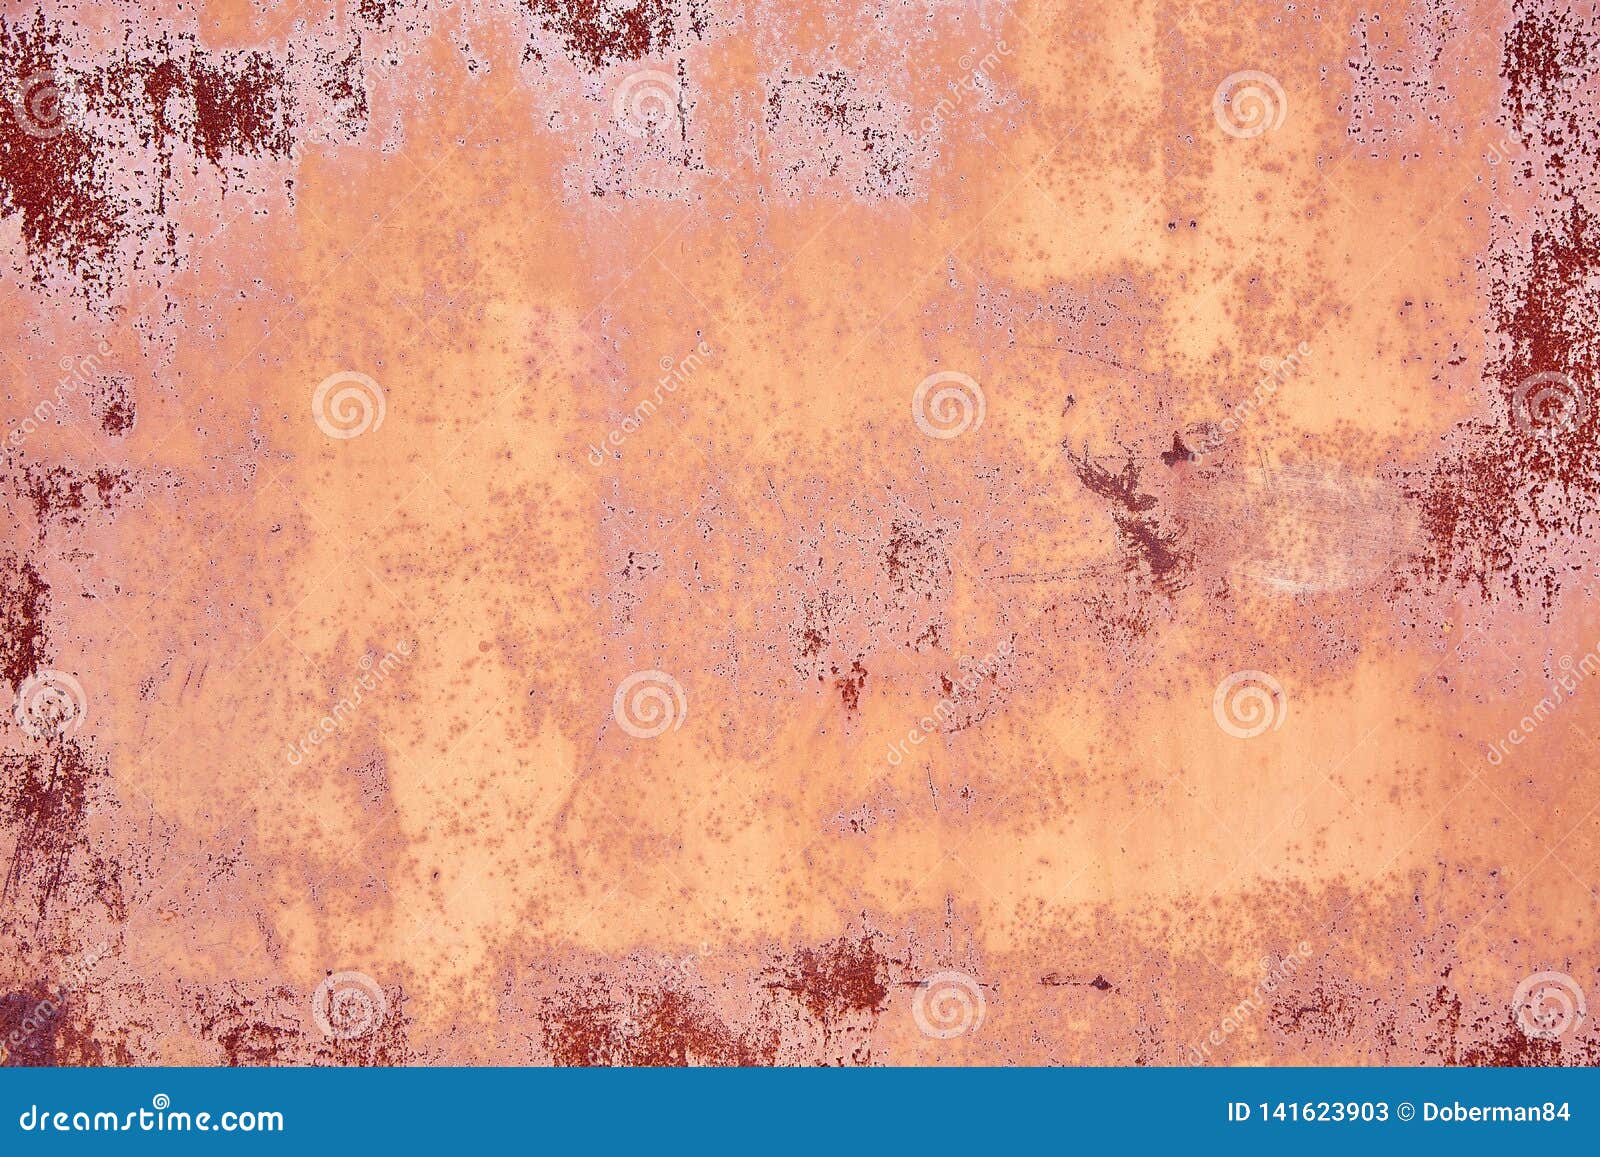 old distressed brown terracotta copper rusty background with rough texture multicolored inclusions. stained gradient